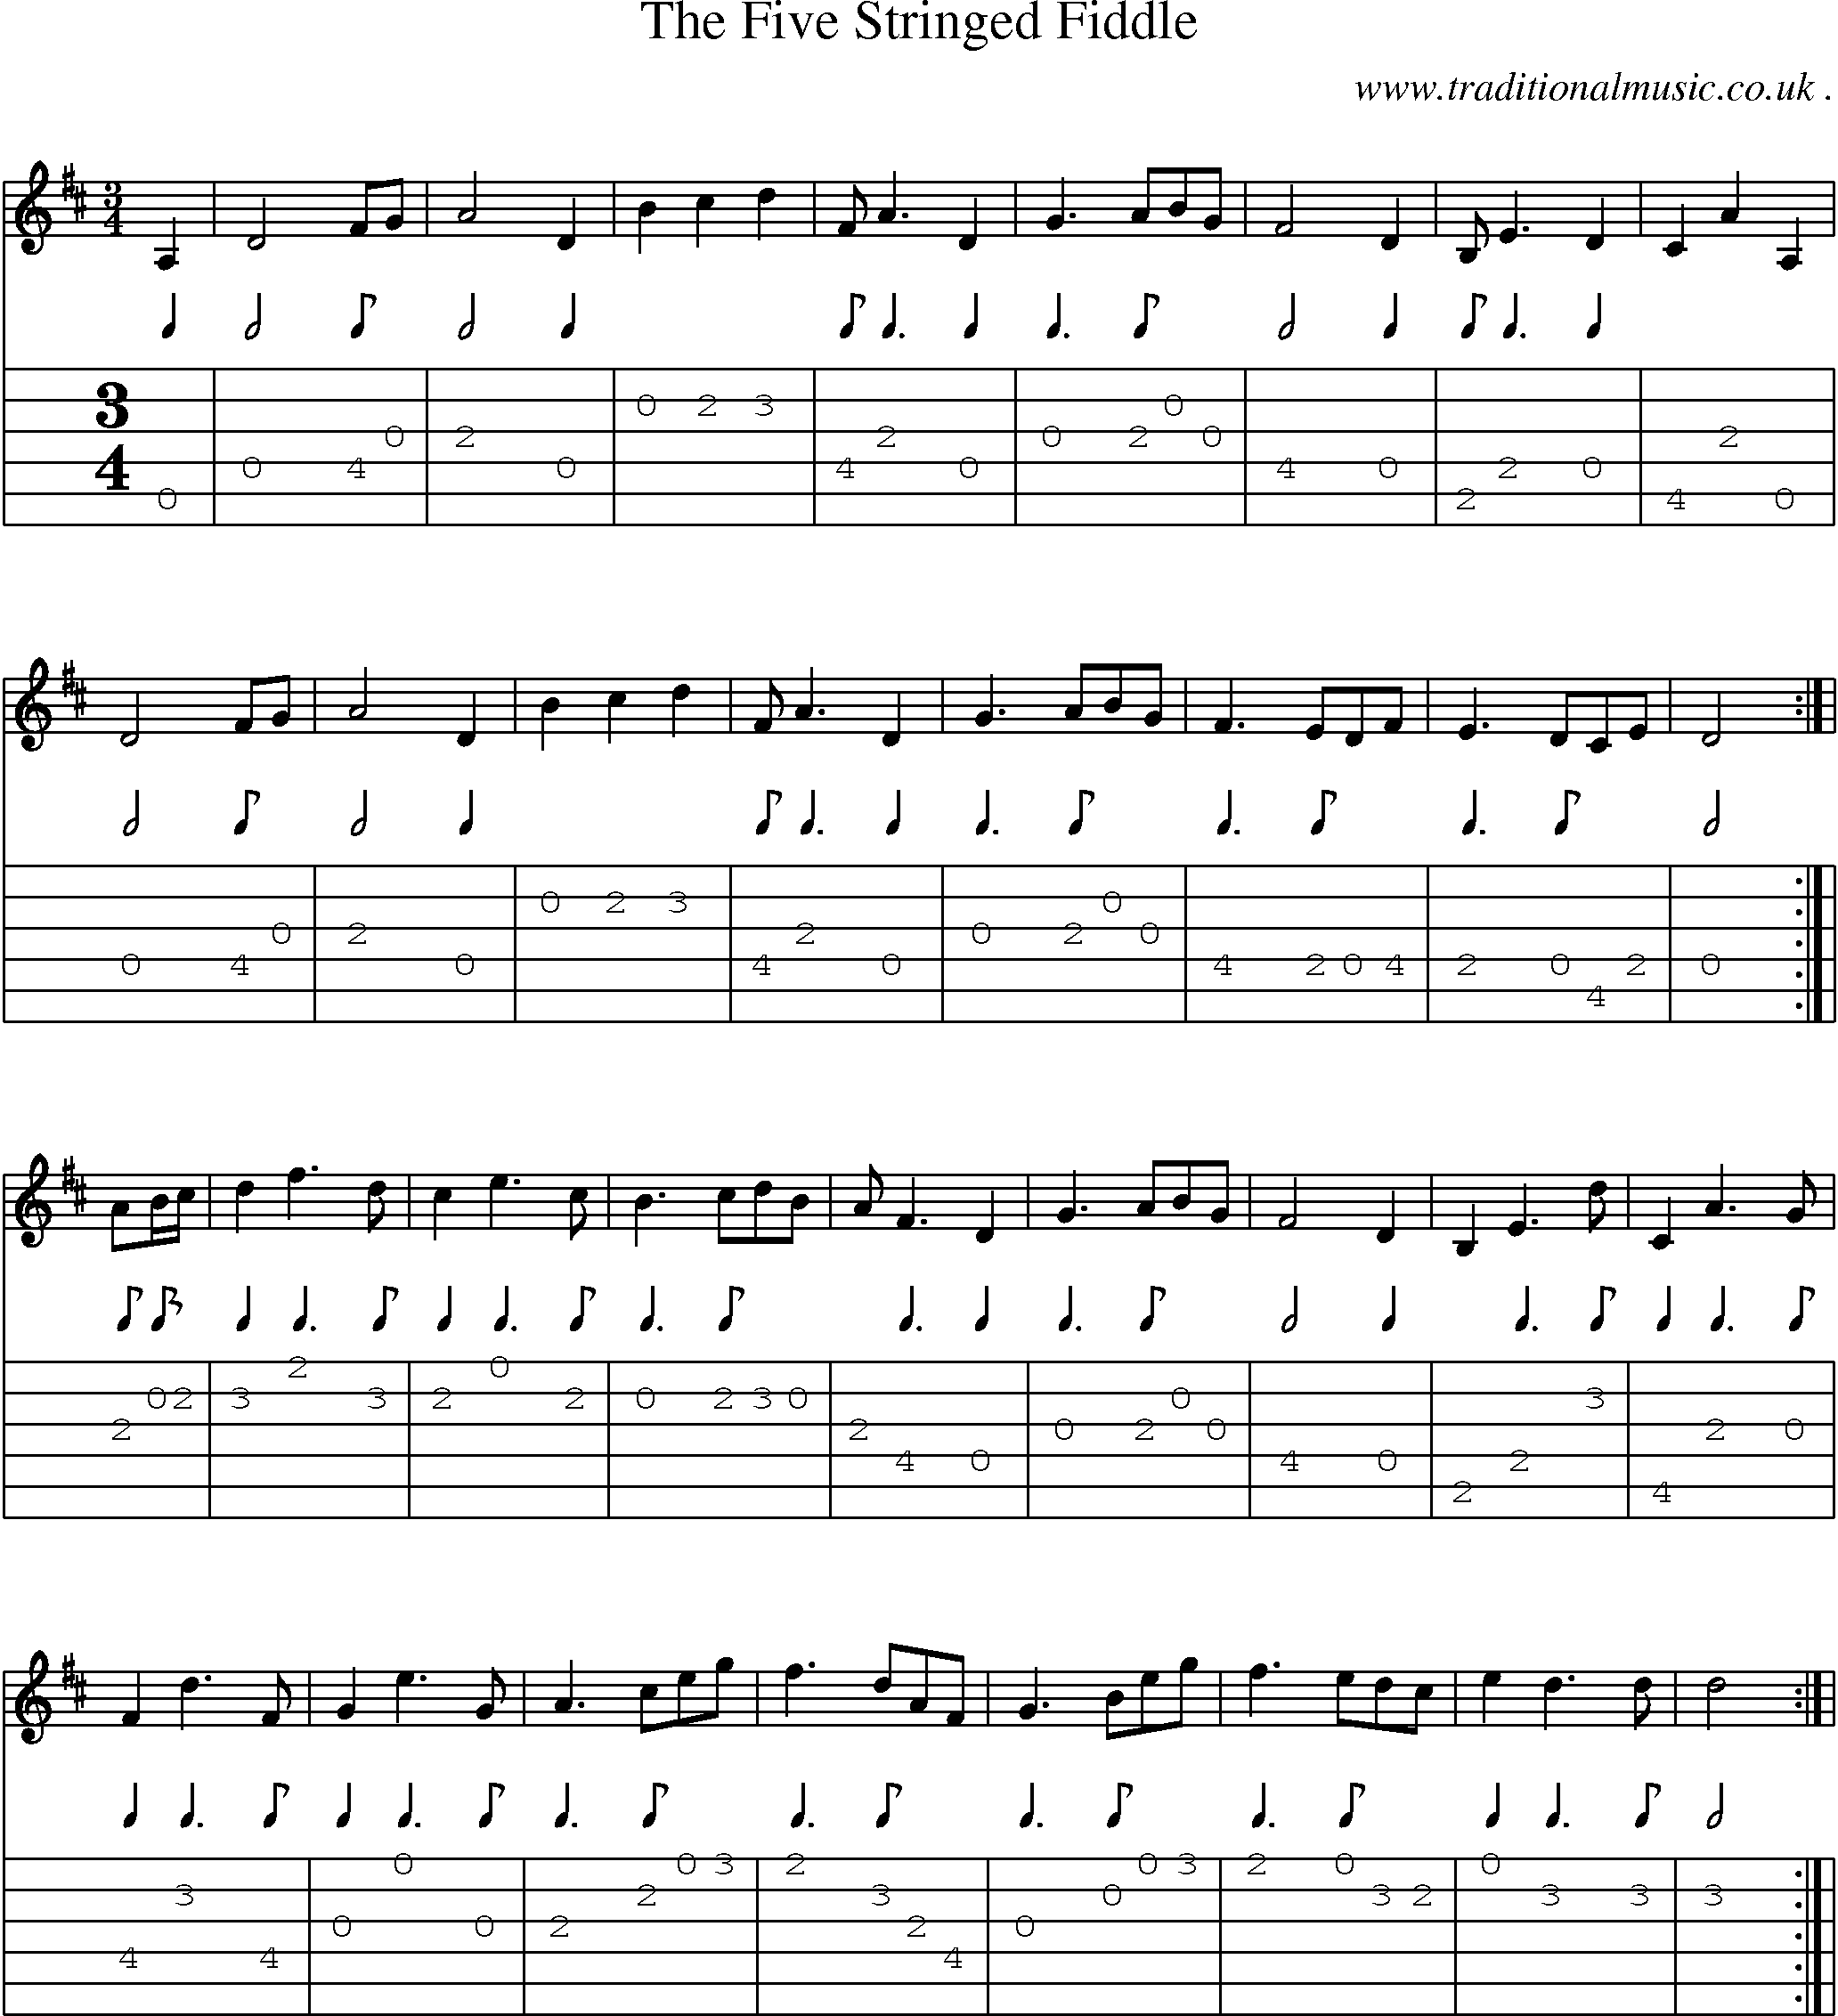 Sheet-Music and Guitar Tabs for The Five Stringed Fiddle